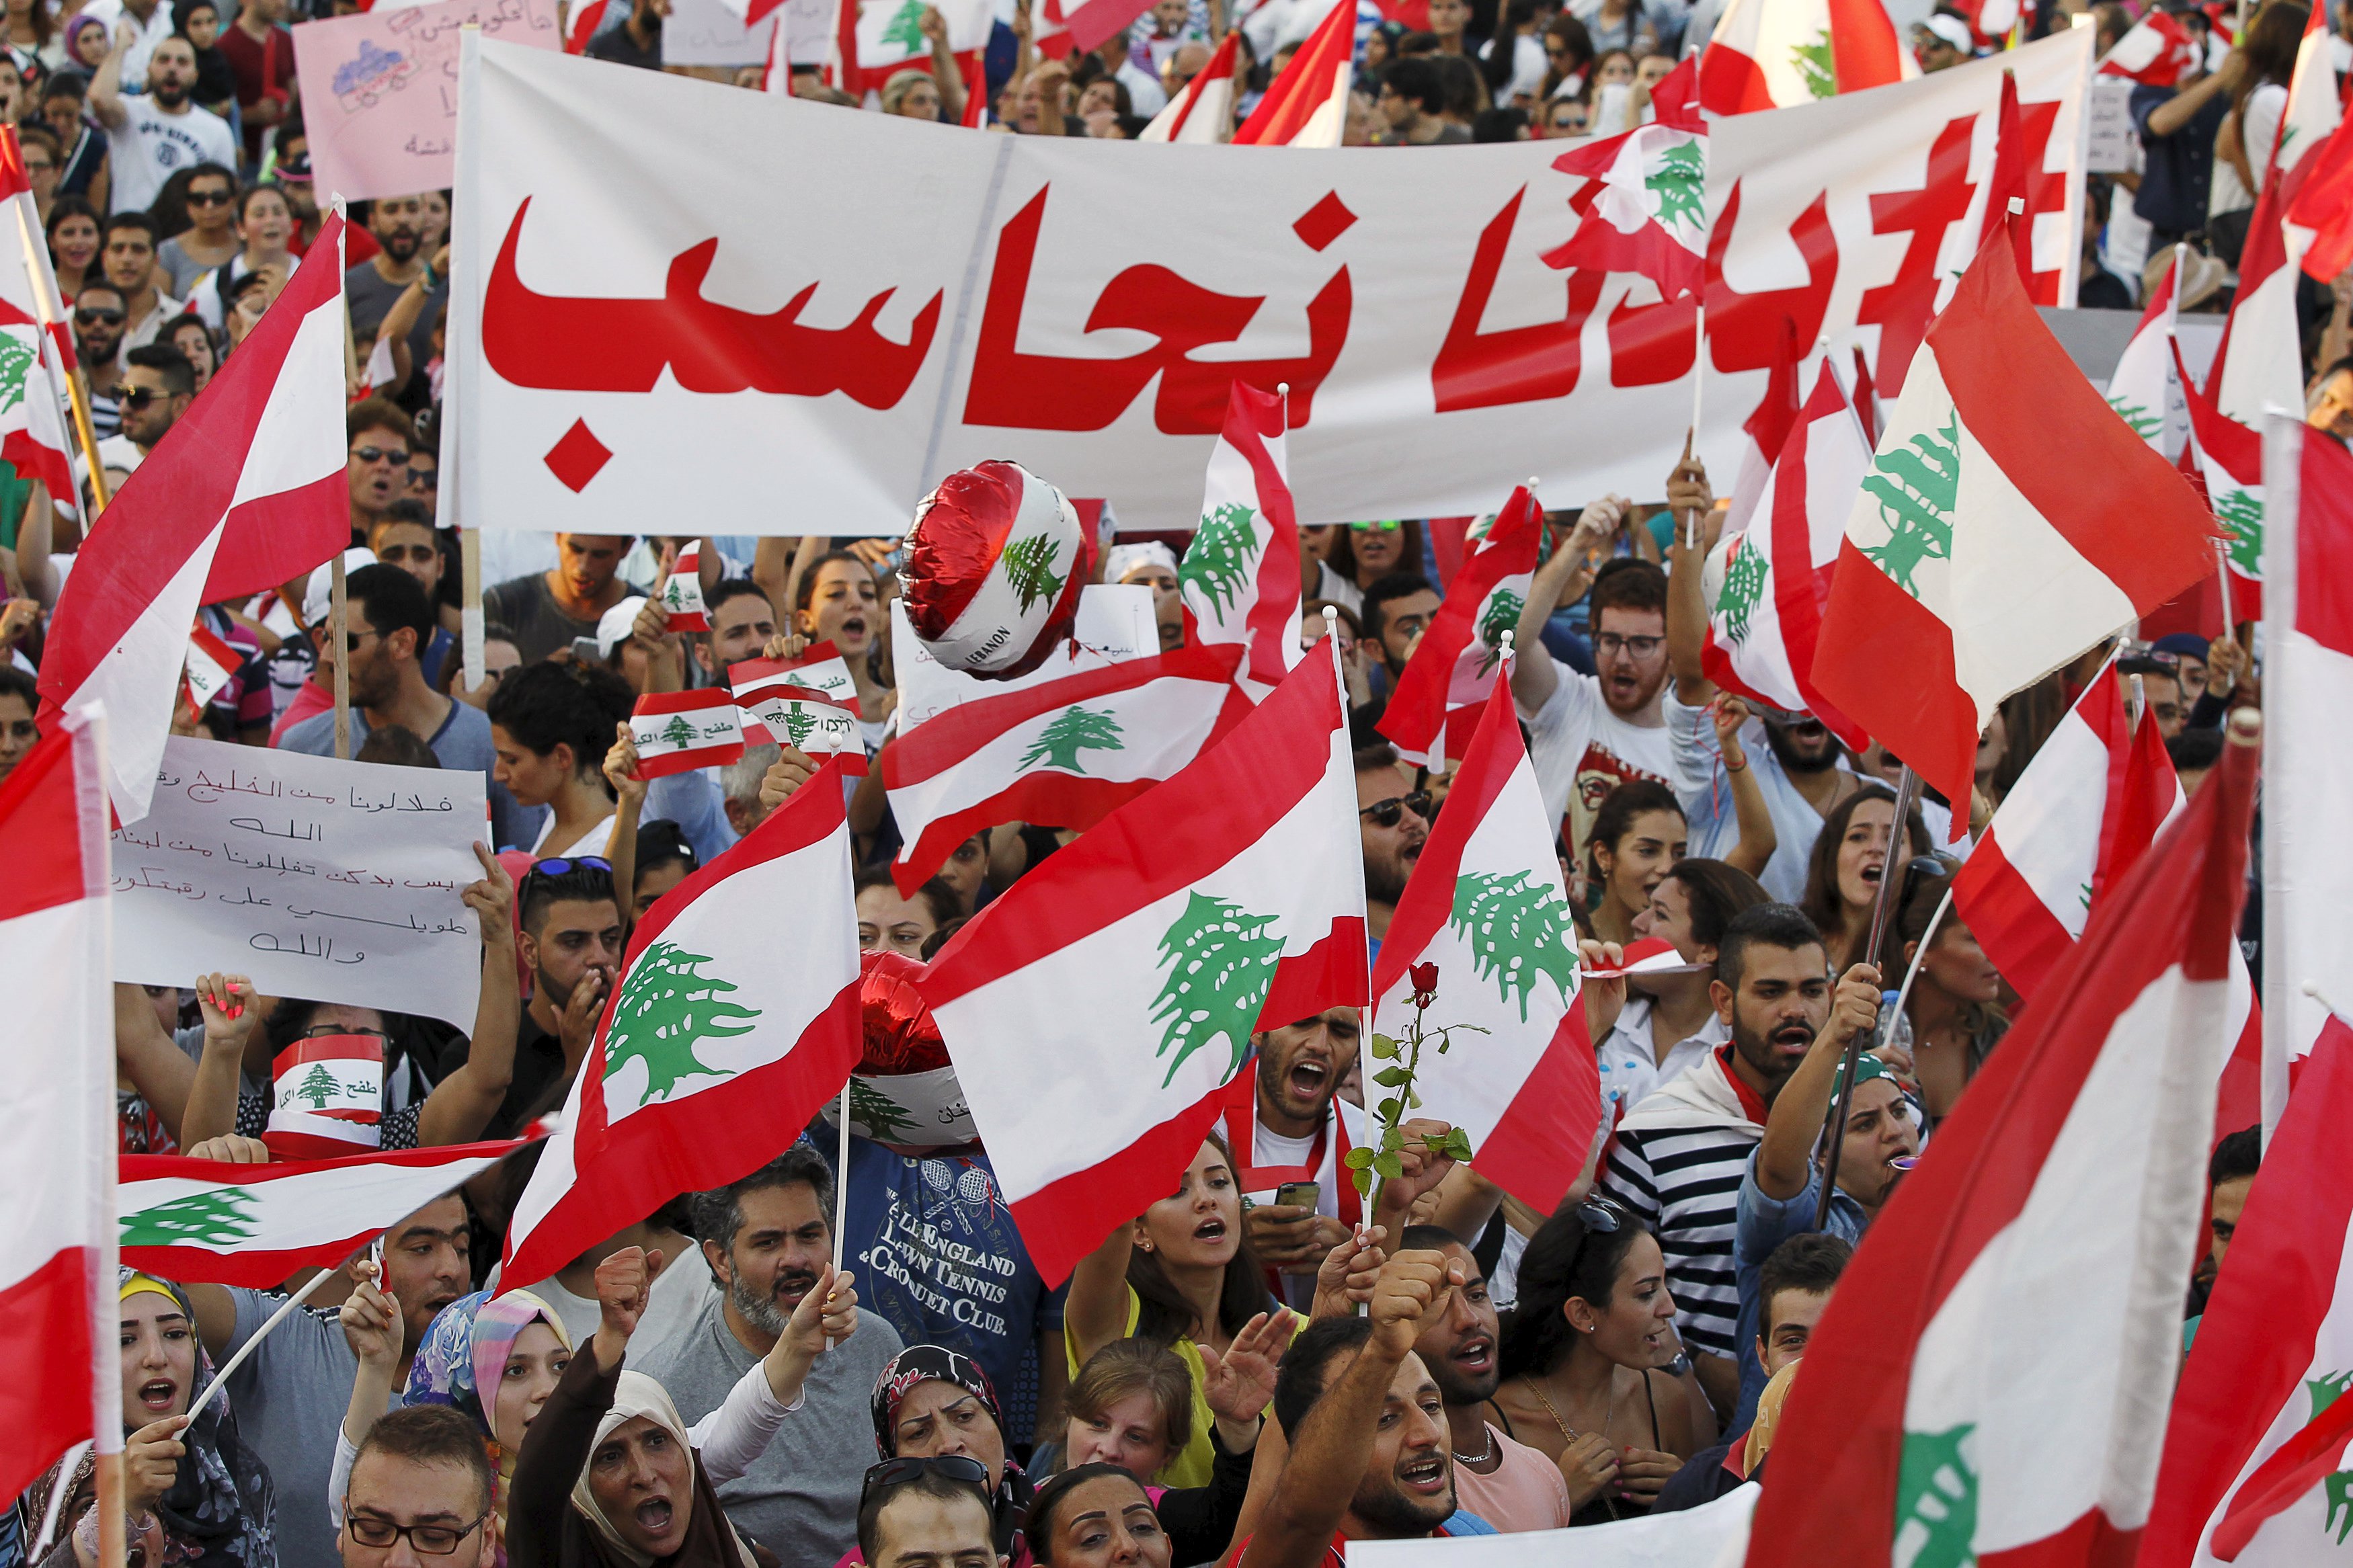 People carry Lebanese national flags and banners as they take part in an anti-government protest at Martyrs' Square in downtown Beirut, Lebanon August 29, 2015.